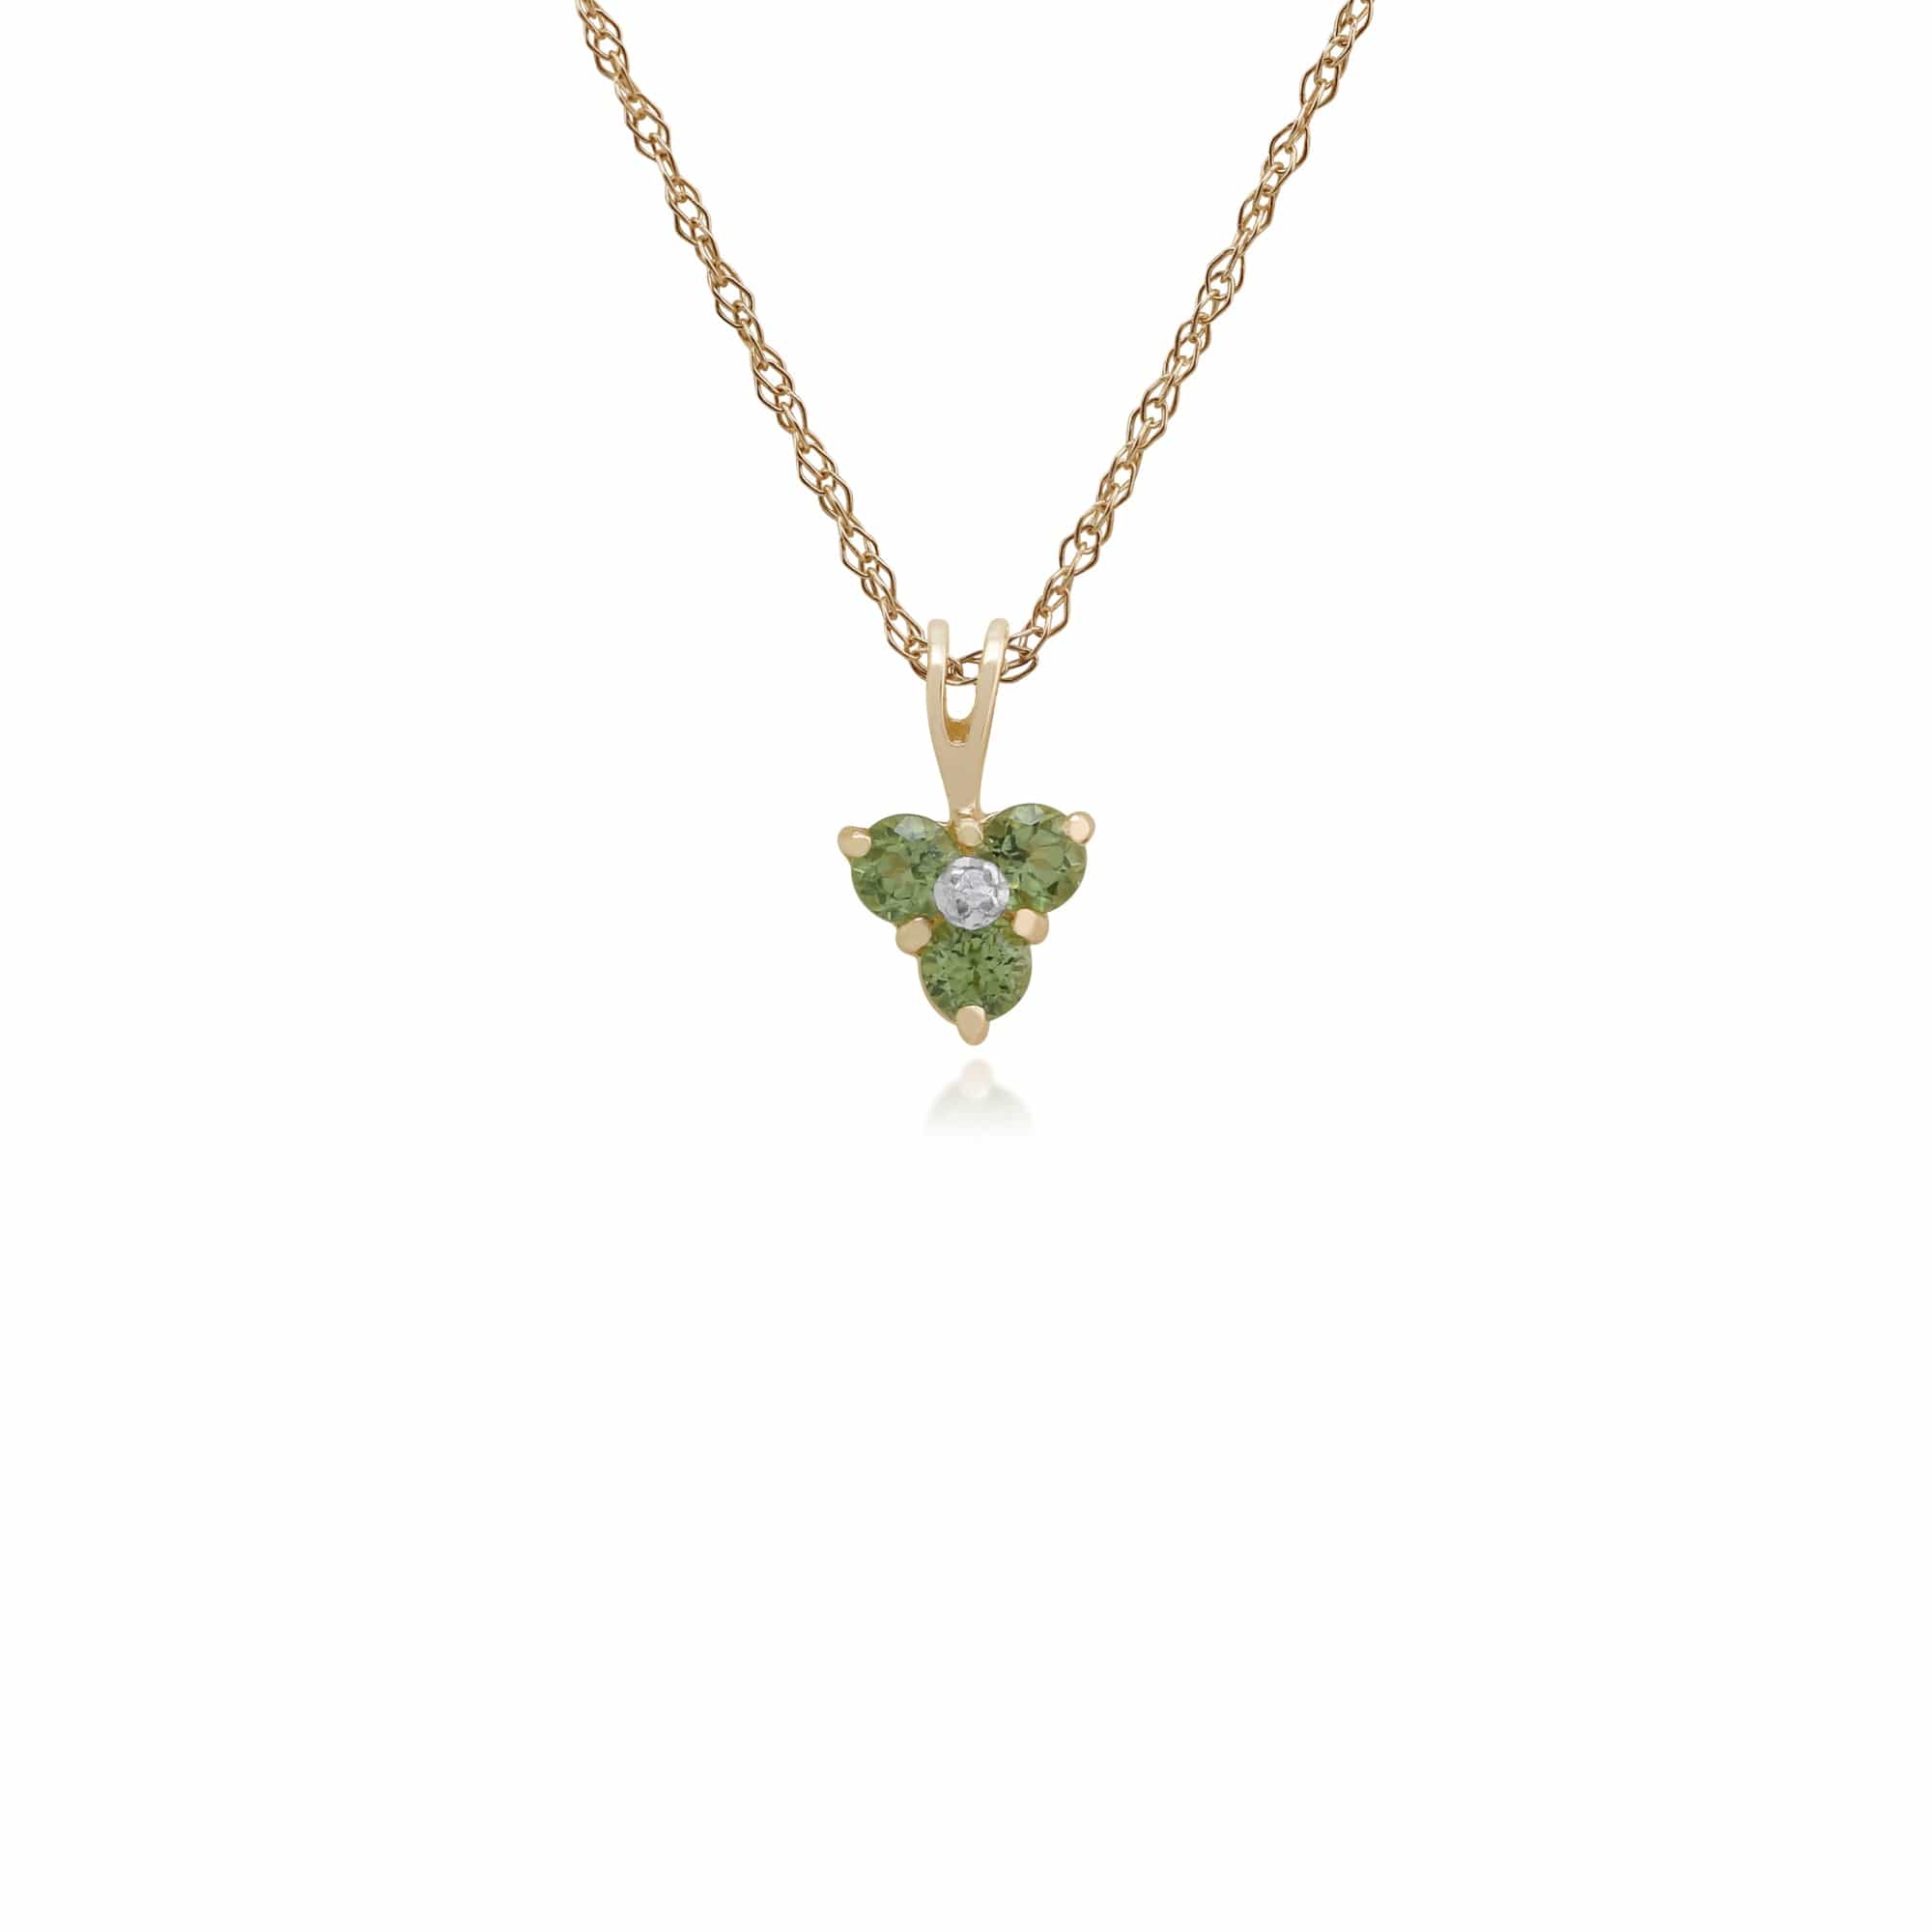 Photos - Pendant / Choker Necklace Floral Round Peridot & Diamond Cluster Pendant in 9ct Yellow Gold